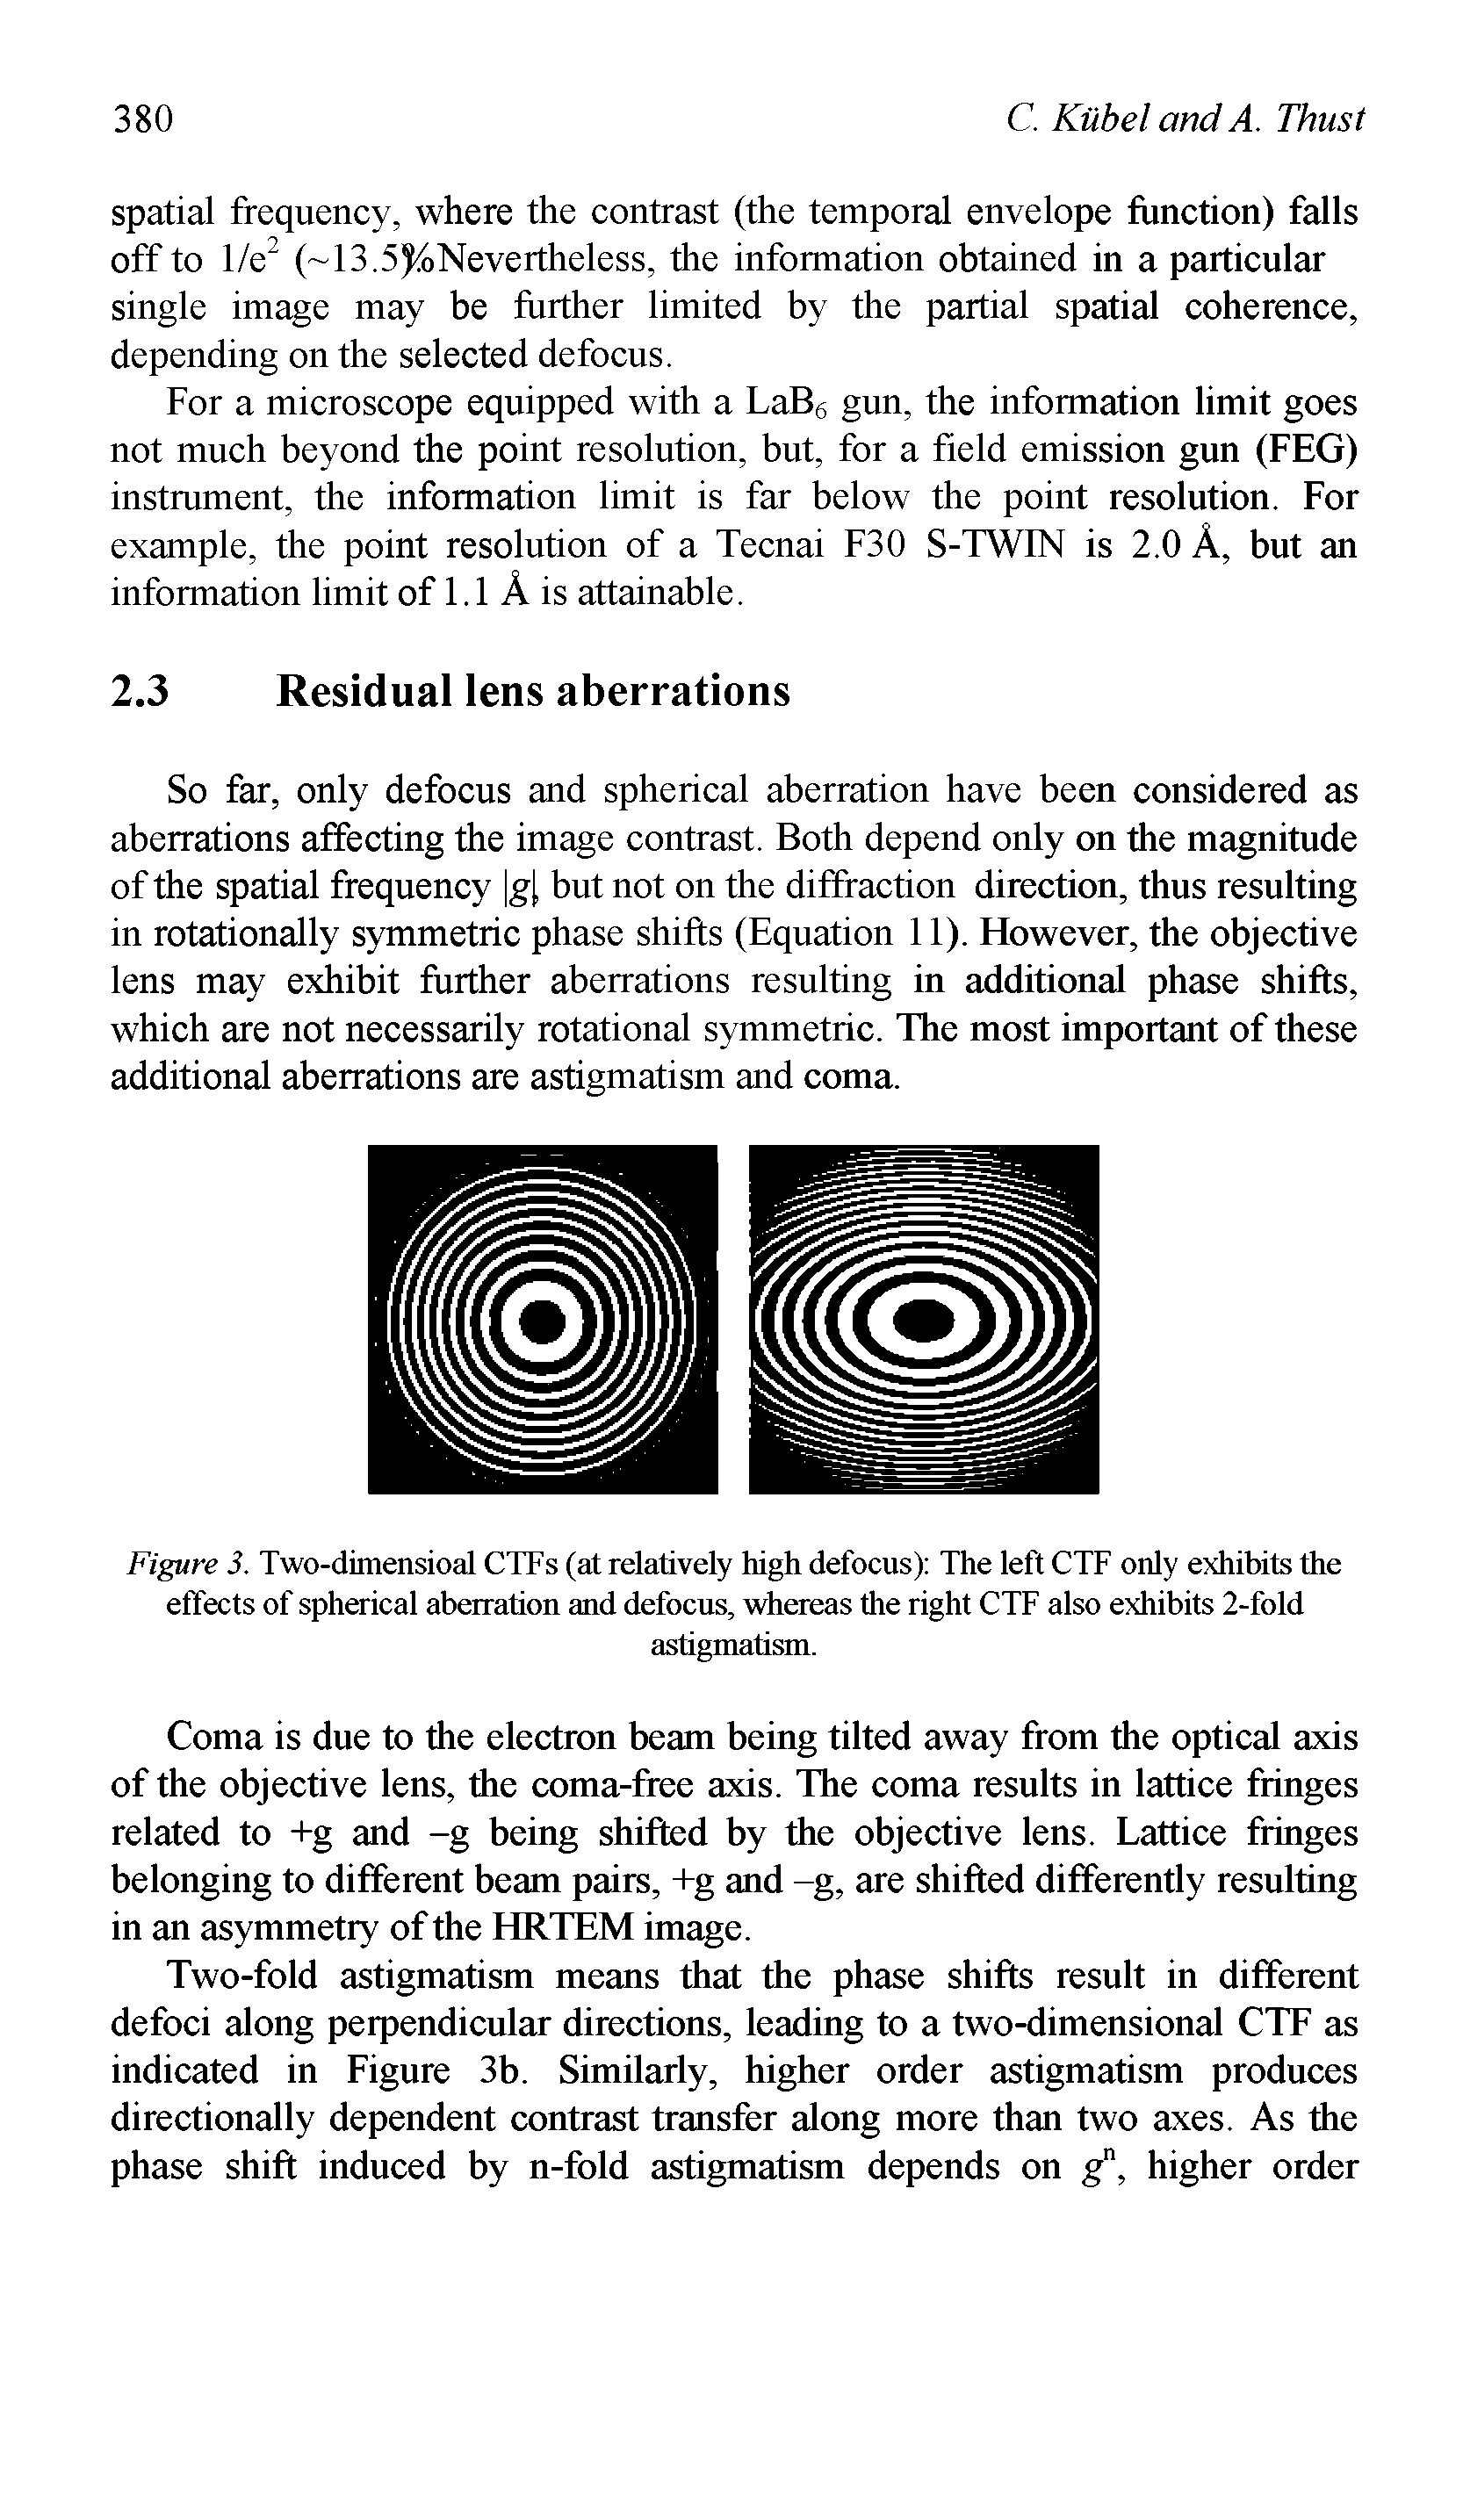 Figure 3. Two-dimensioal CTFs (at relatively high defocus) The left CTF only exhibits the effects of spherical aberration and defocus, whereas the right CTF also exhibits 2-fold...